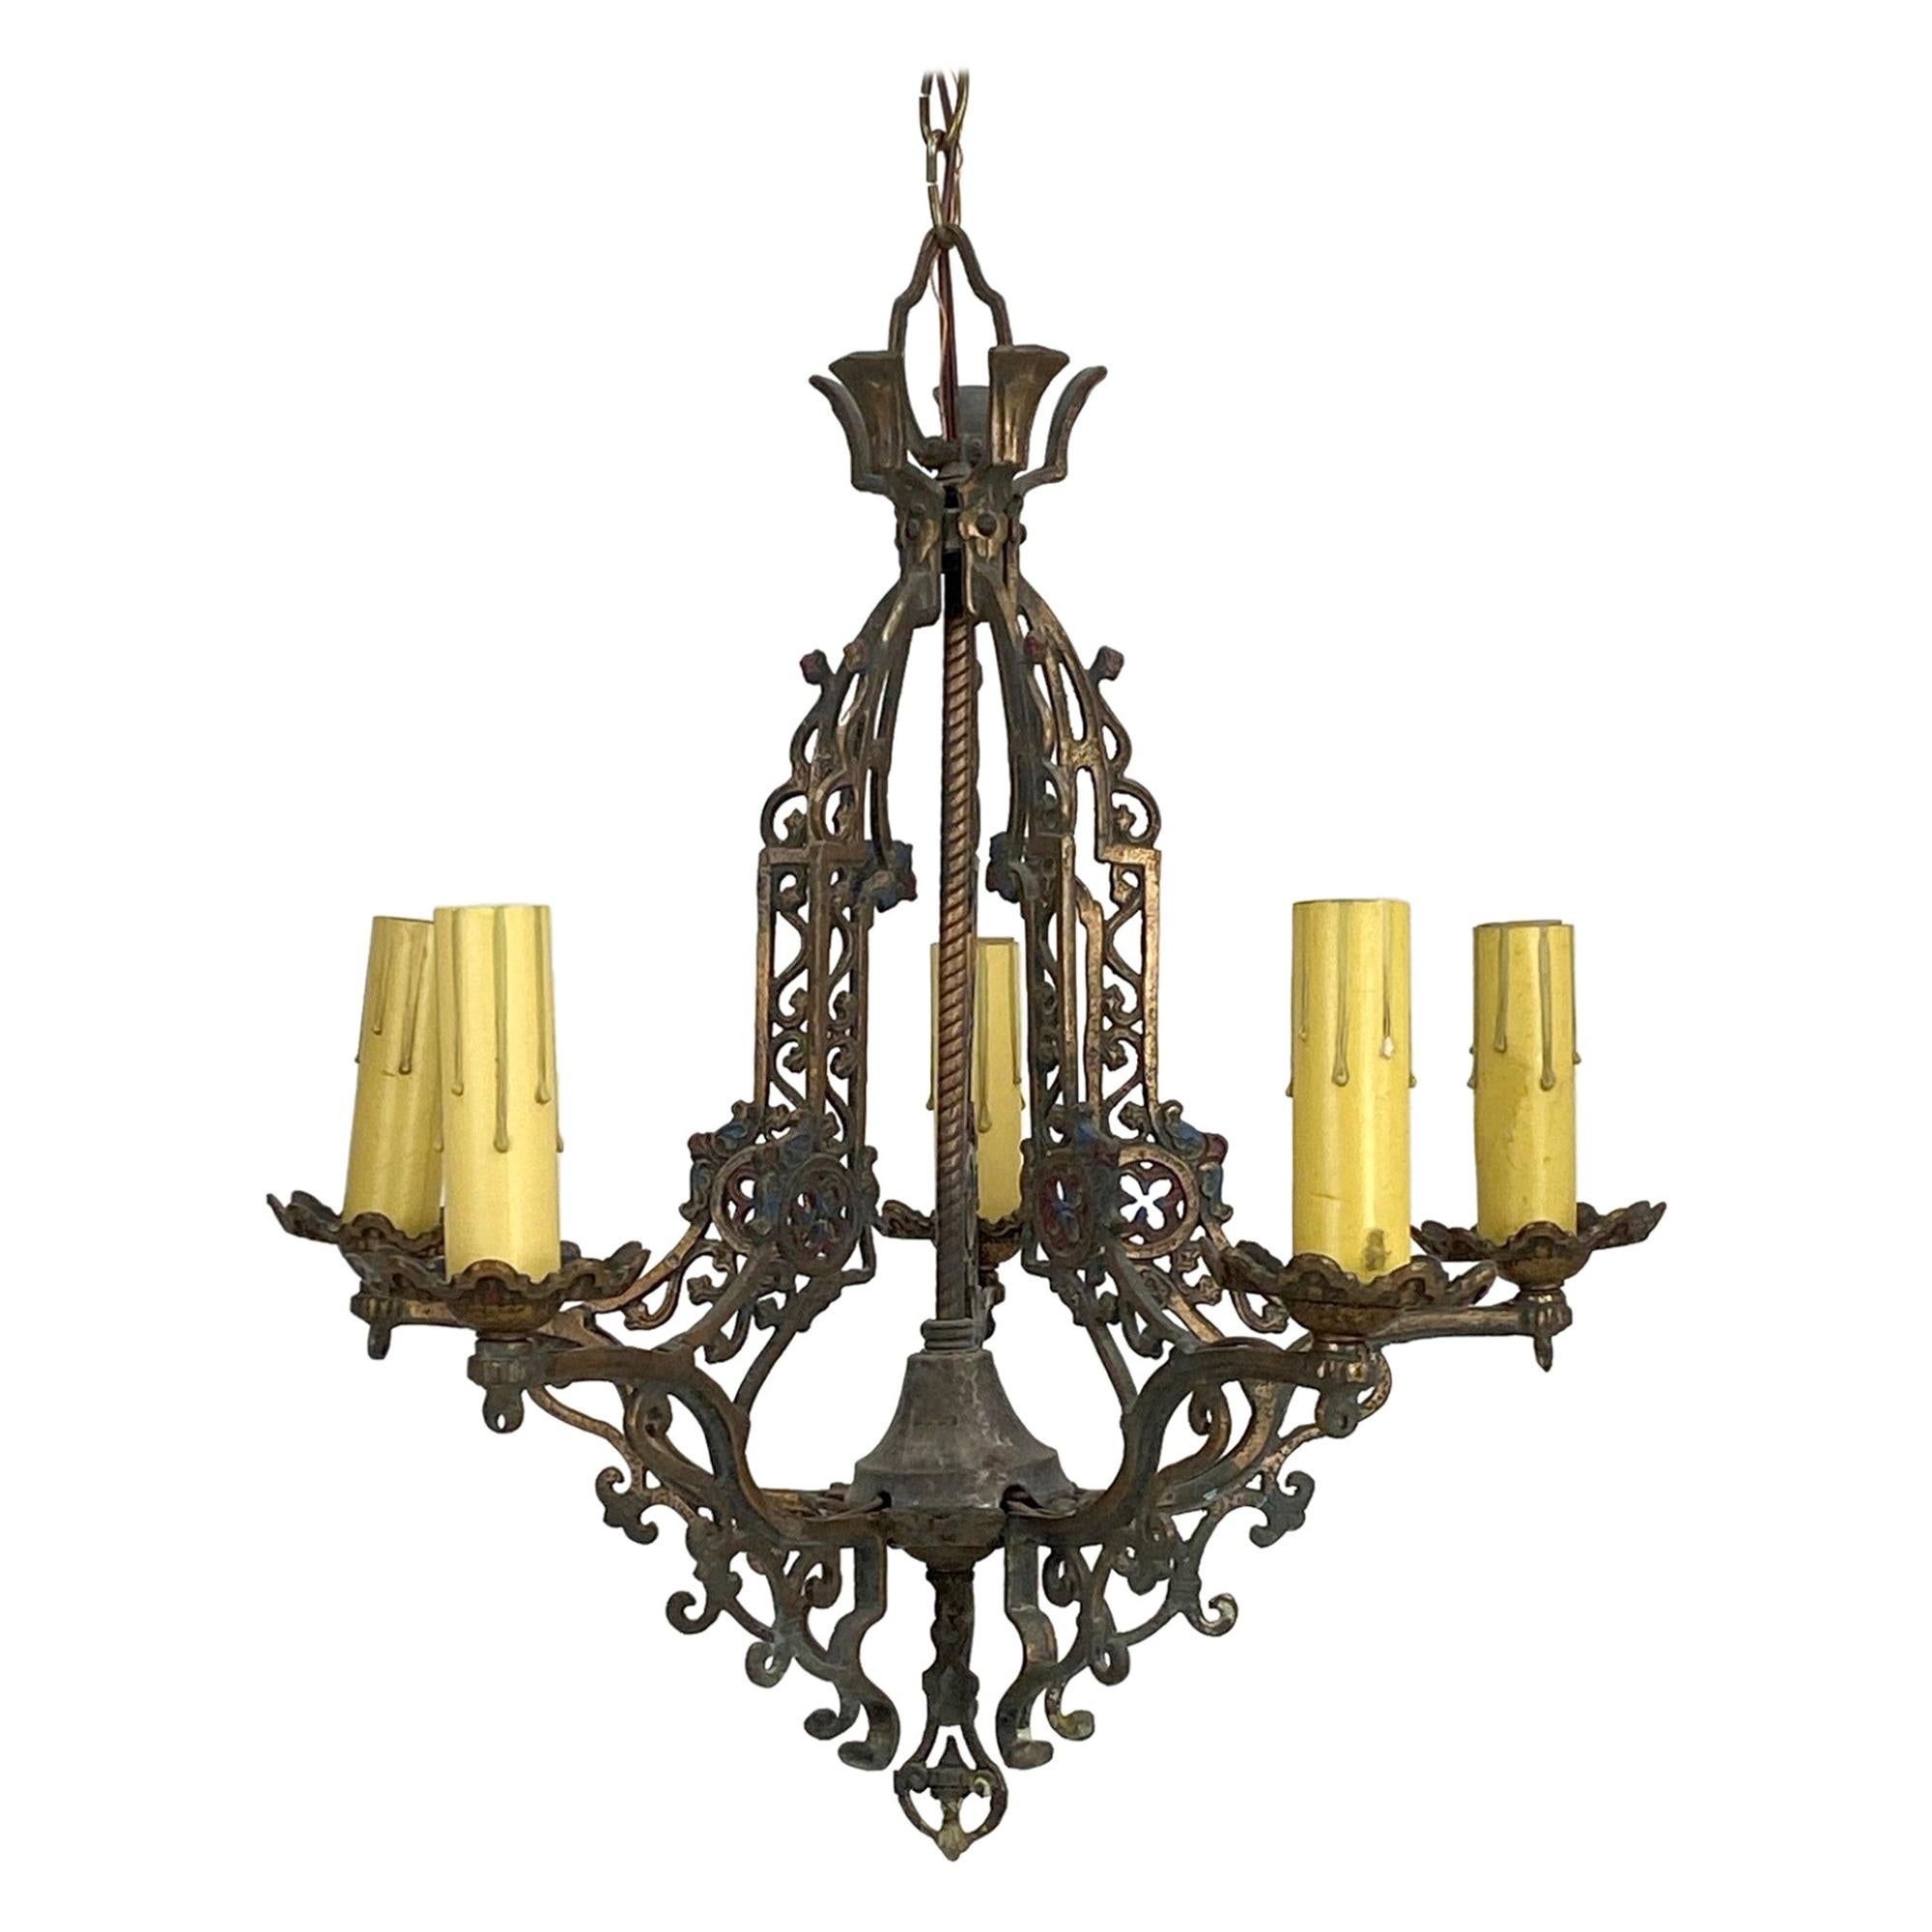 1920s Arts & Crafts Five Arm Chandelier with Bronze Finish